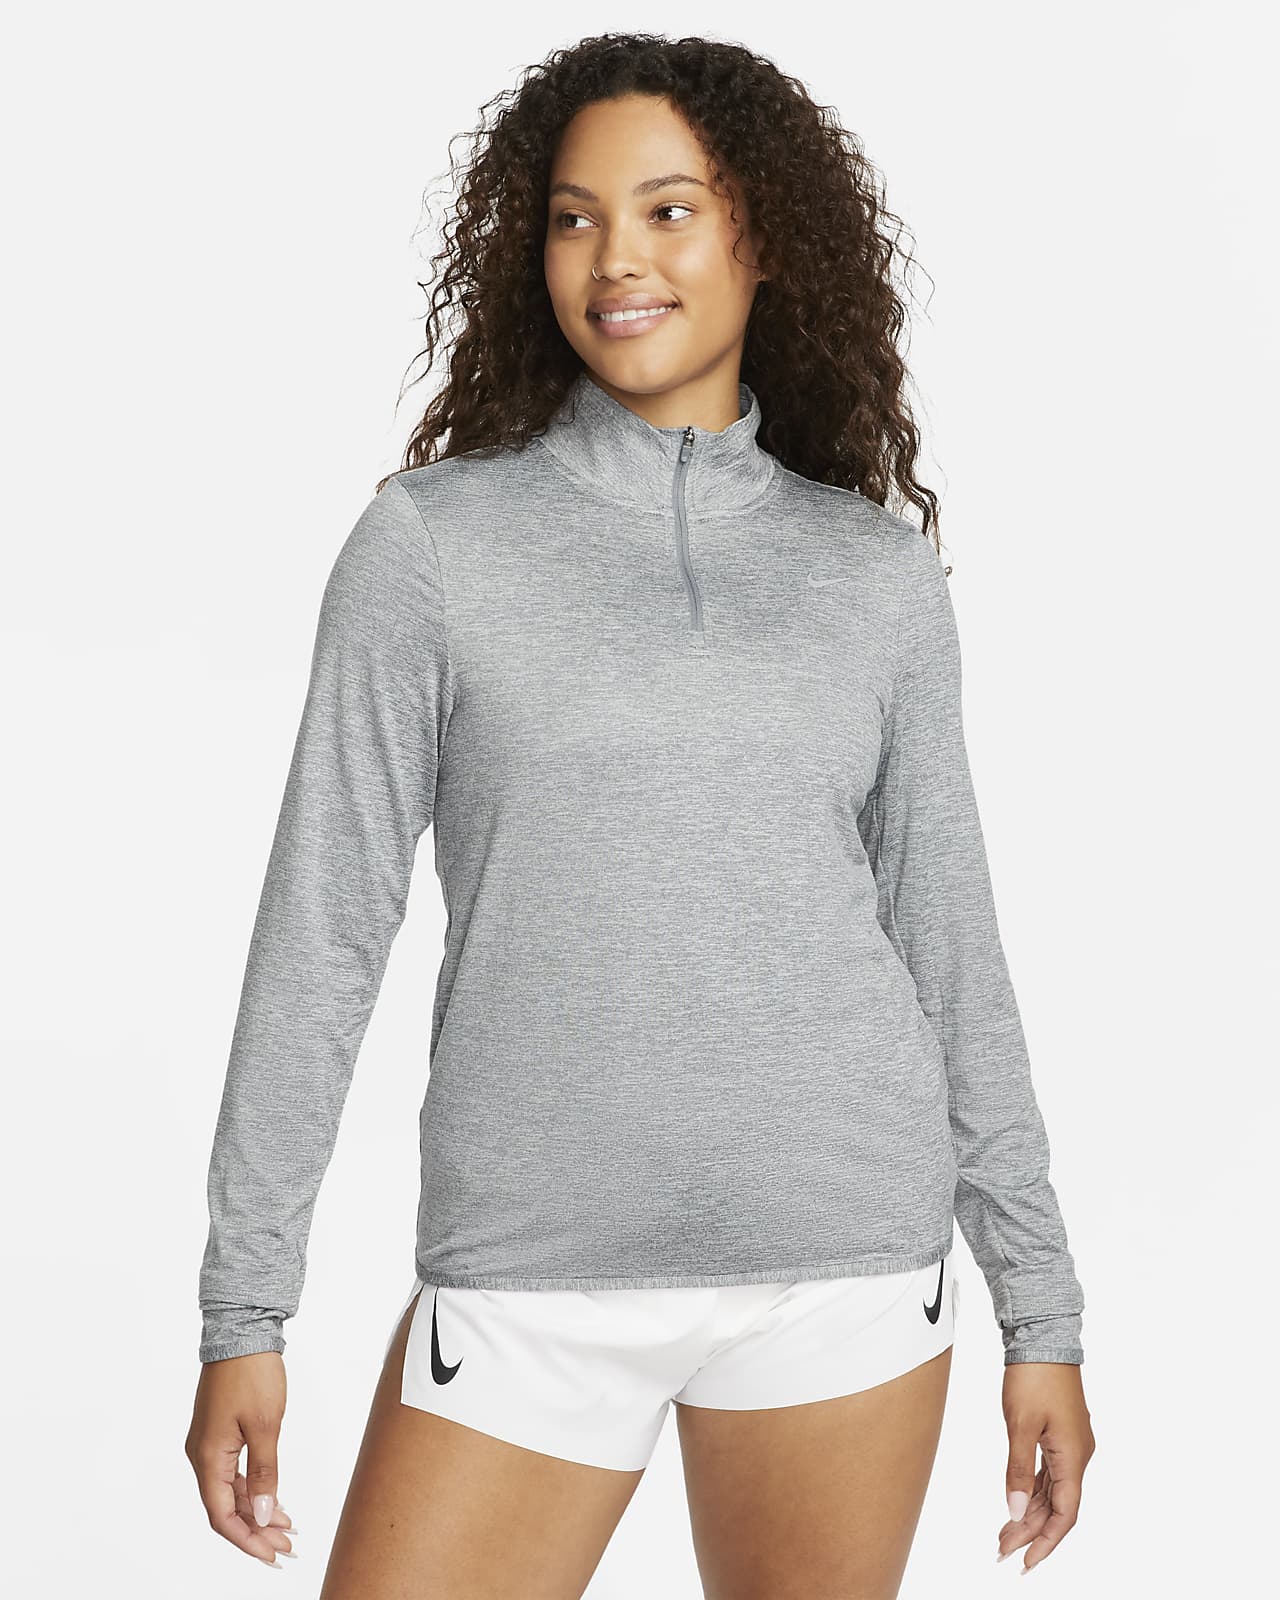 Nike Womens Cover Running Top 